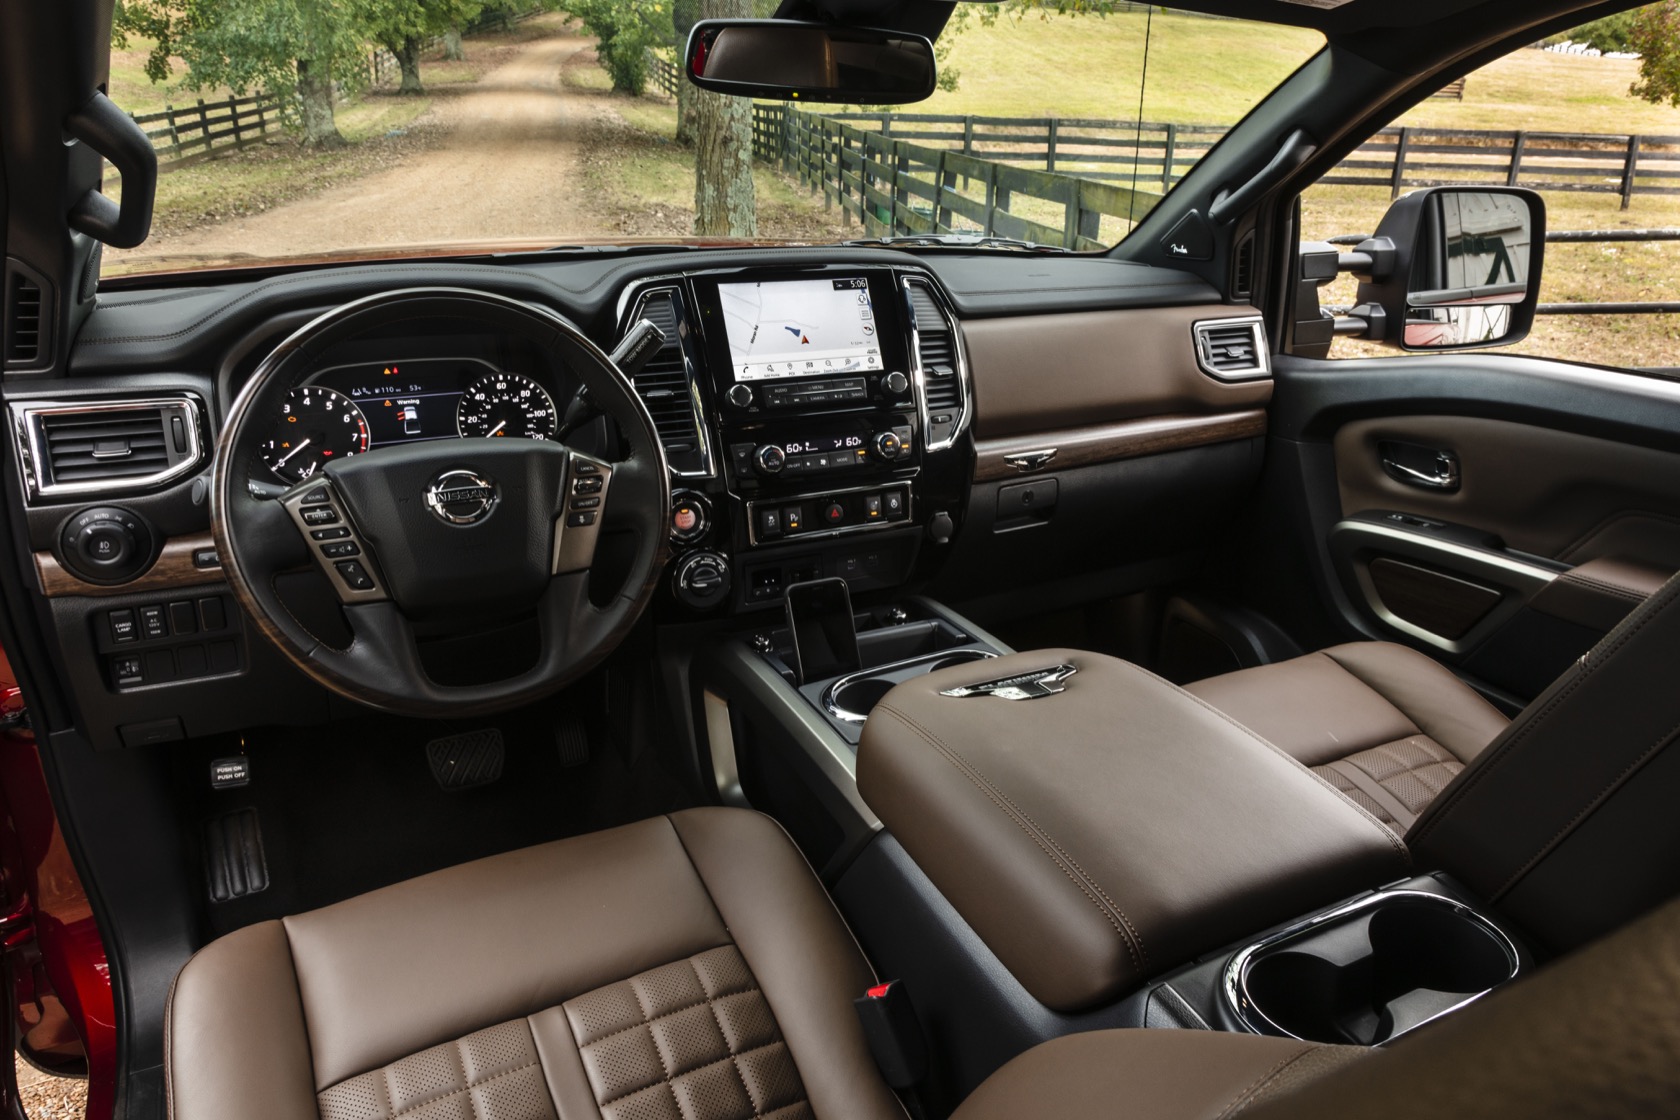 2020 Nissan Titan Xd Adds Power And Tech But Cuts Cab